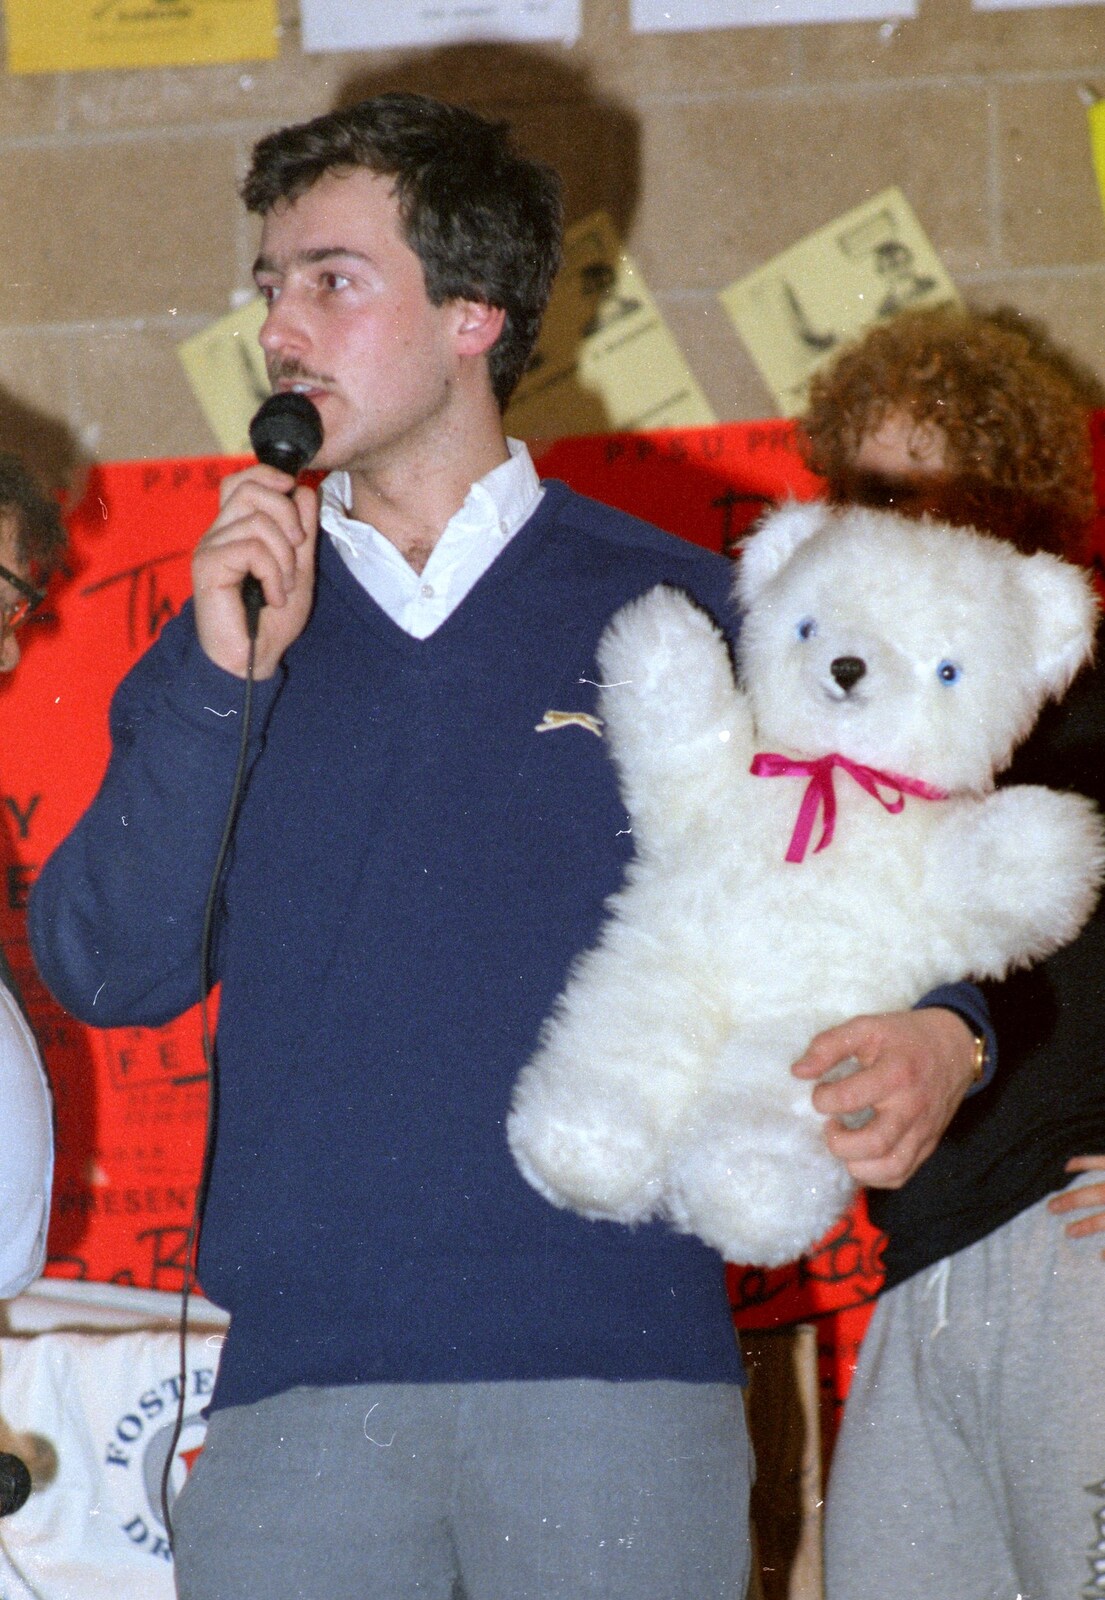 Mark Wilkins auctions off a stuffed teddy from Uni: Pirate RAG Bash, Games Nights and Brian's Beard, PPSU, Plymouth - 10th February 1987